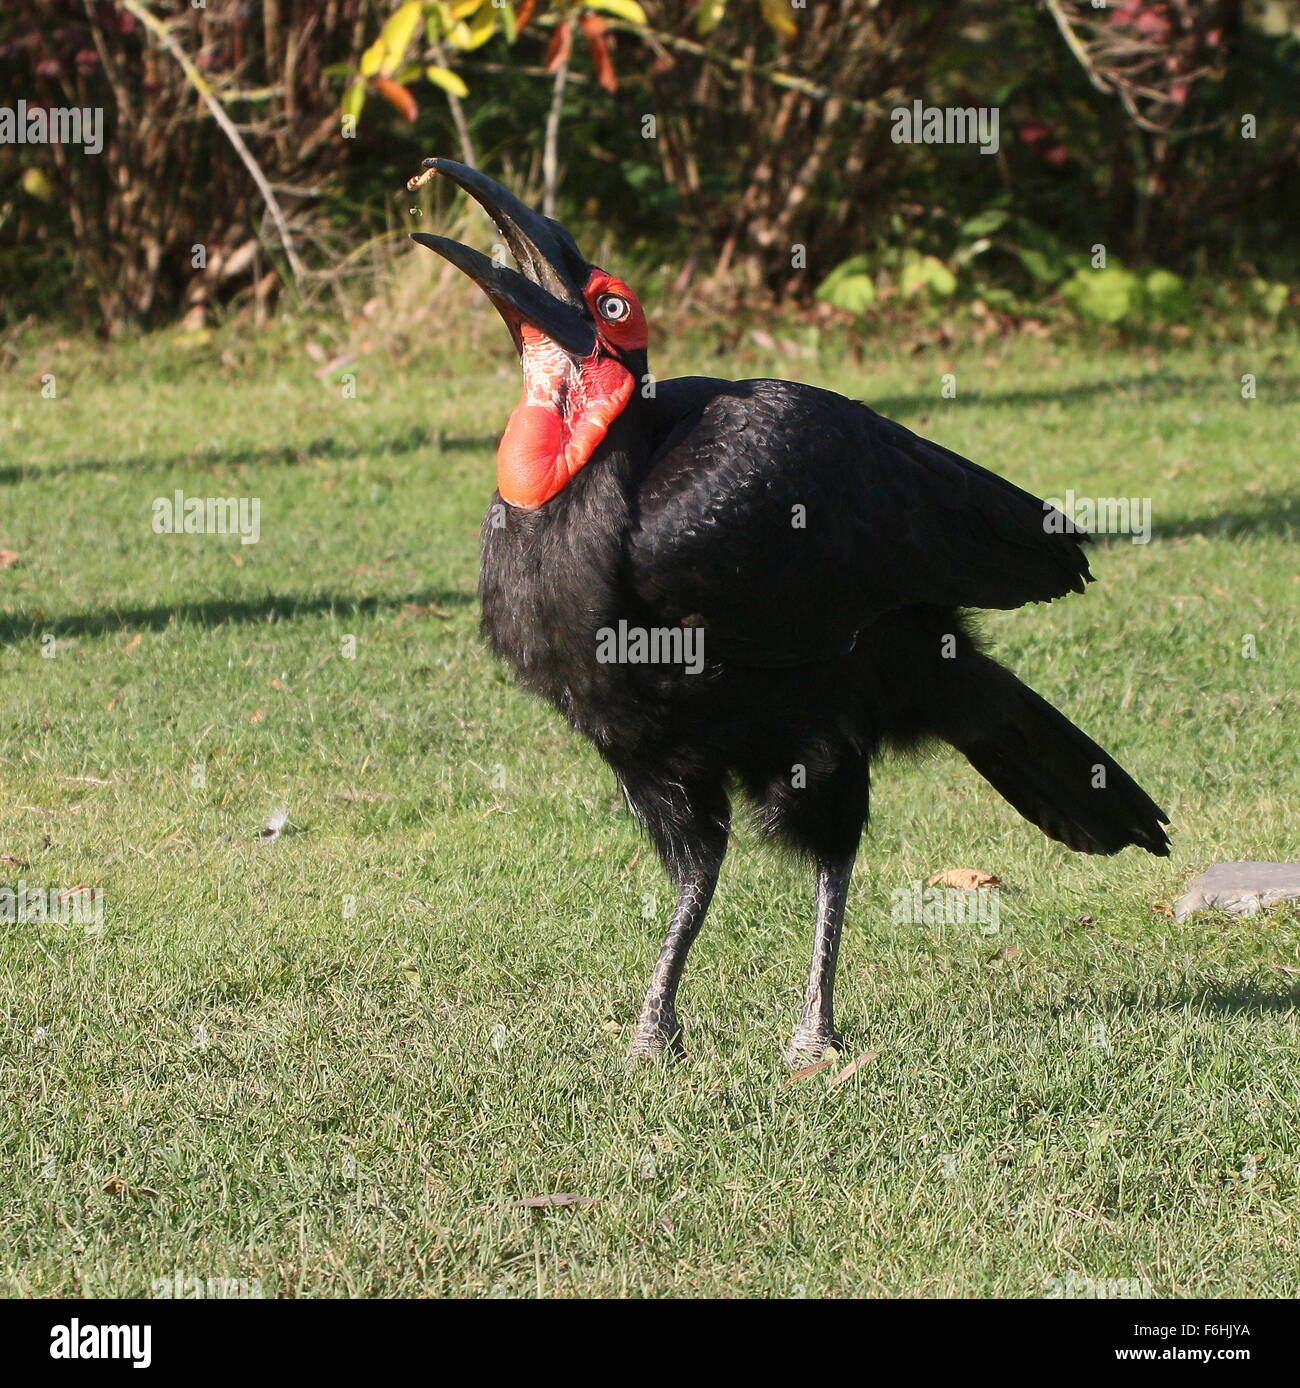 Male African Southern ground Hornbill (Bucorvus Leadbeateri) swallowing a piece of fruit Stock Photo